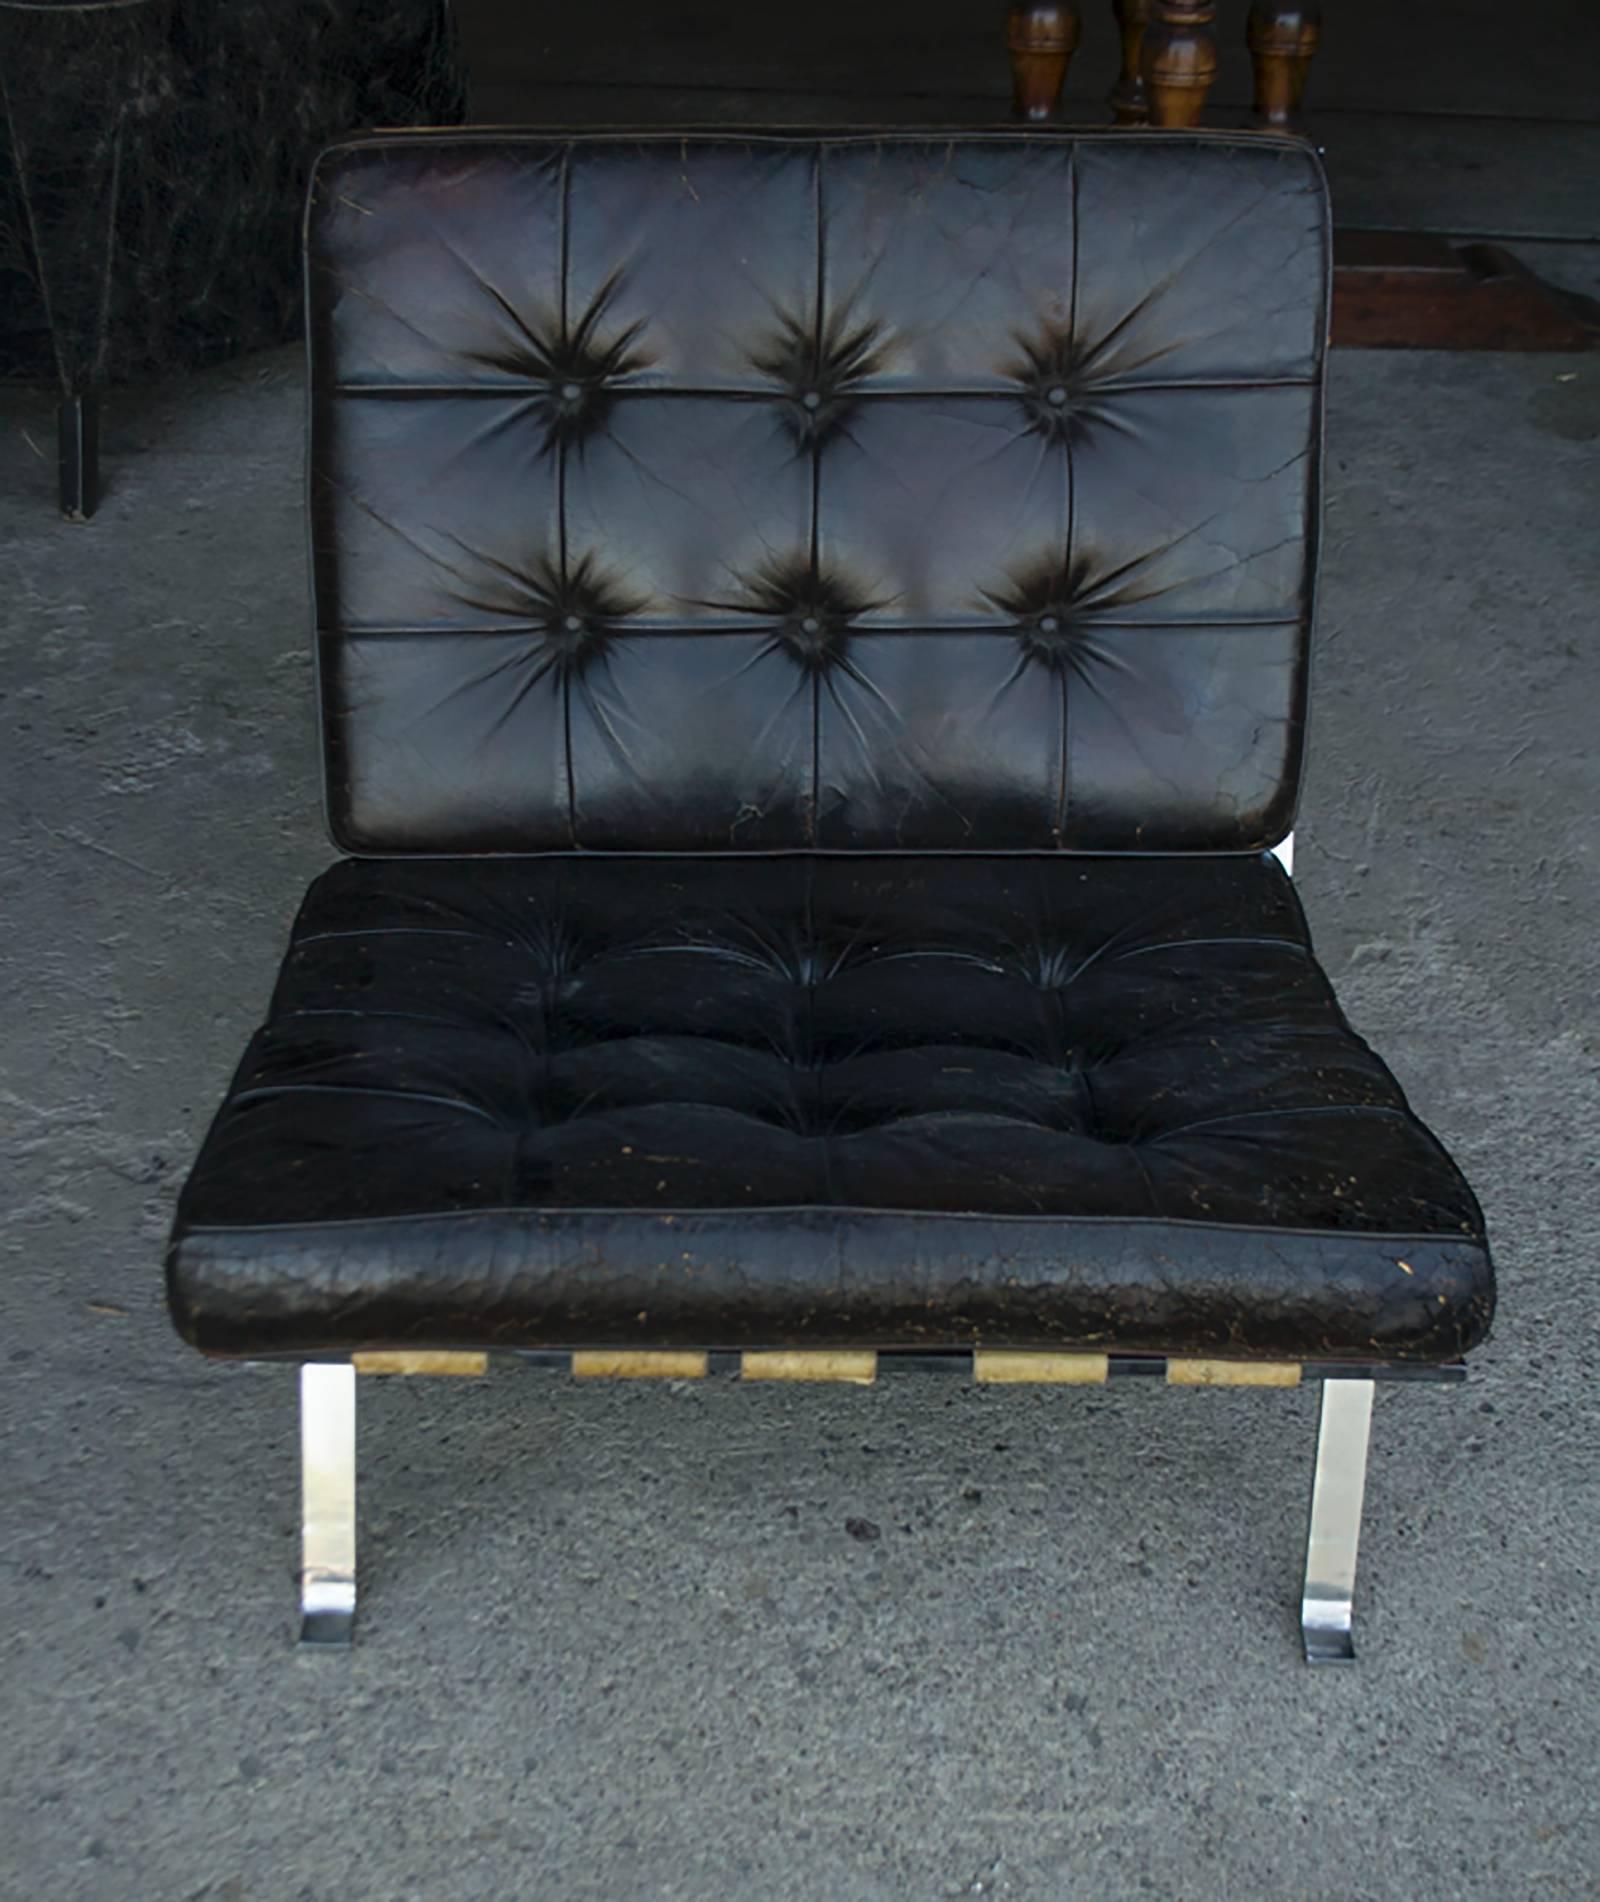 Vintage black tufted leather lounge chair.